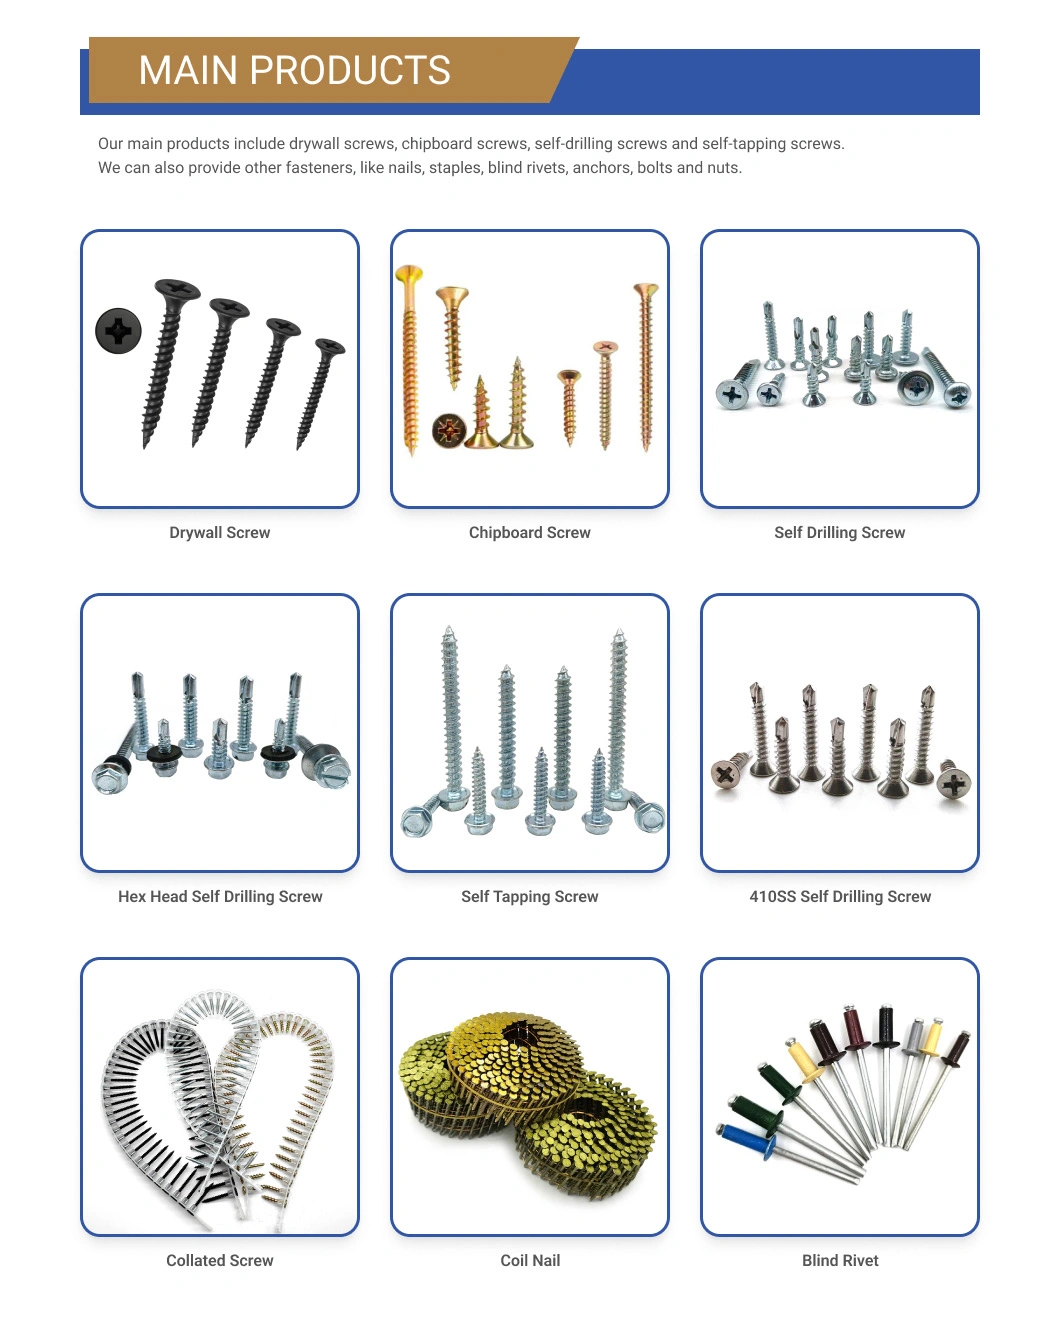 China Wholesale Manufacturer Good Quality Chipboard Screw/Wood Screw/Self Tapping Screw/Self Drilling Screw/Drywall Screw